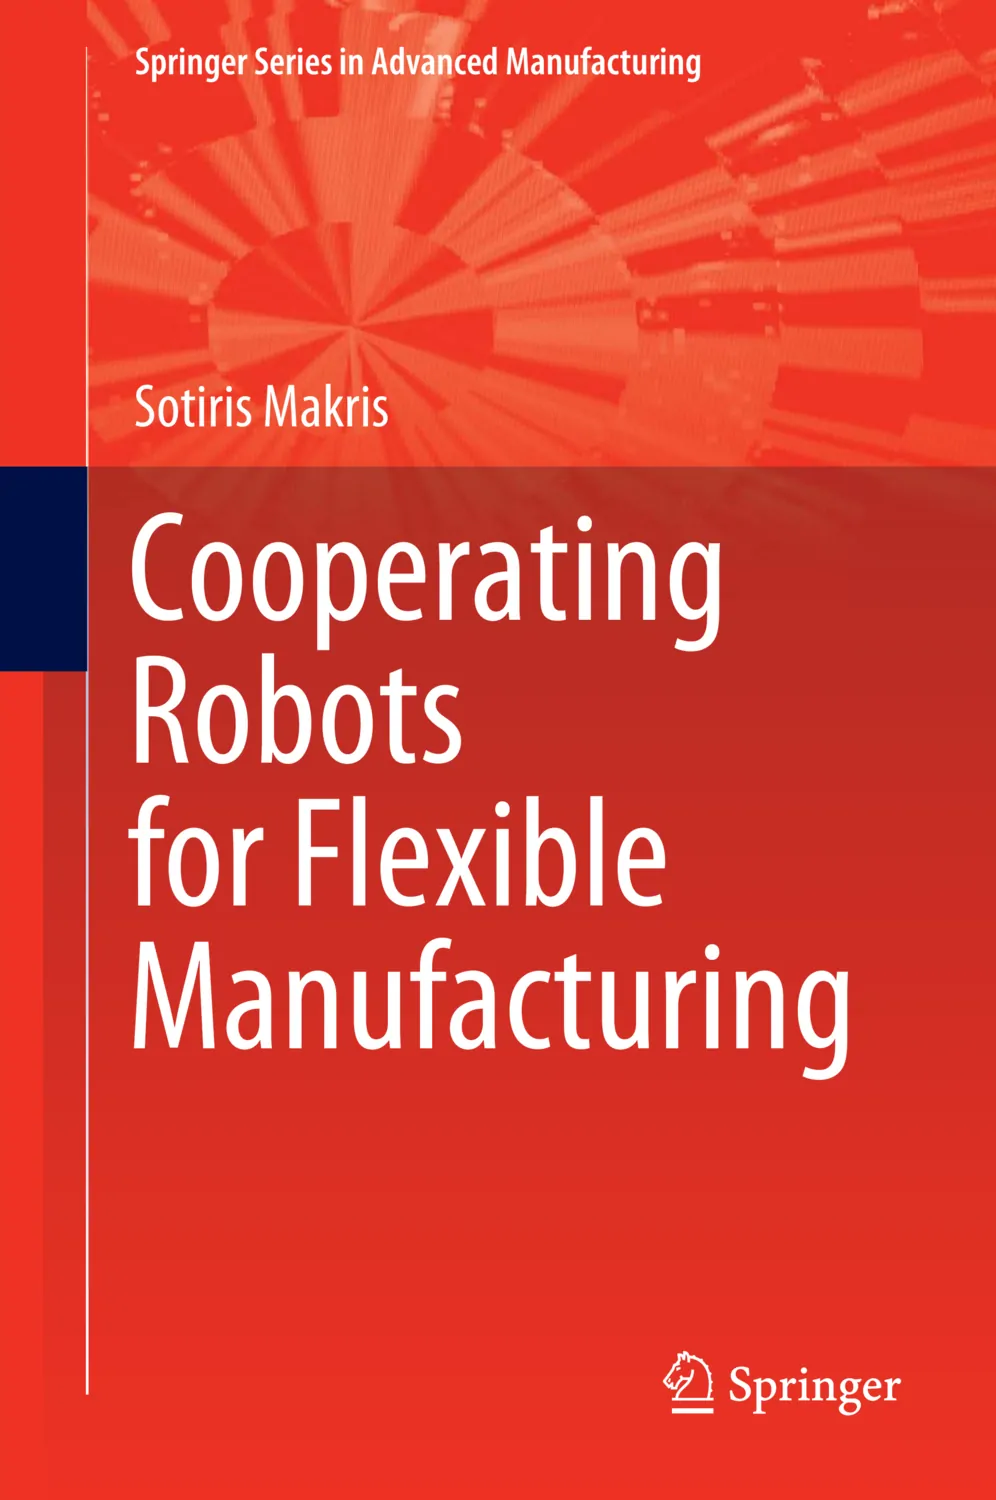 Cooperating Robots for Flexible Manufacturing